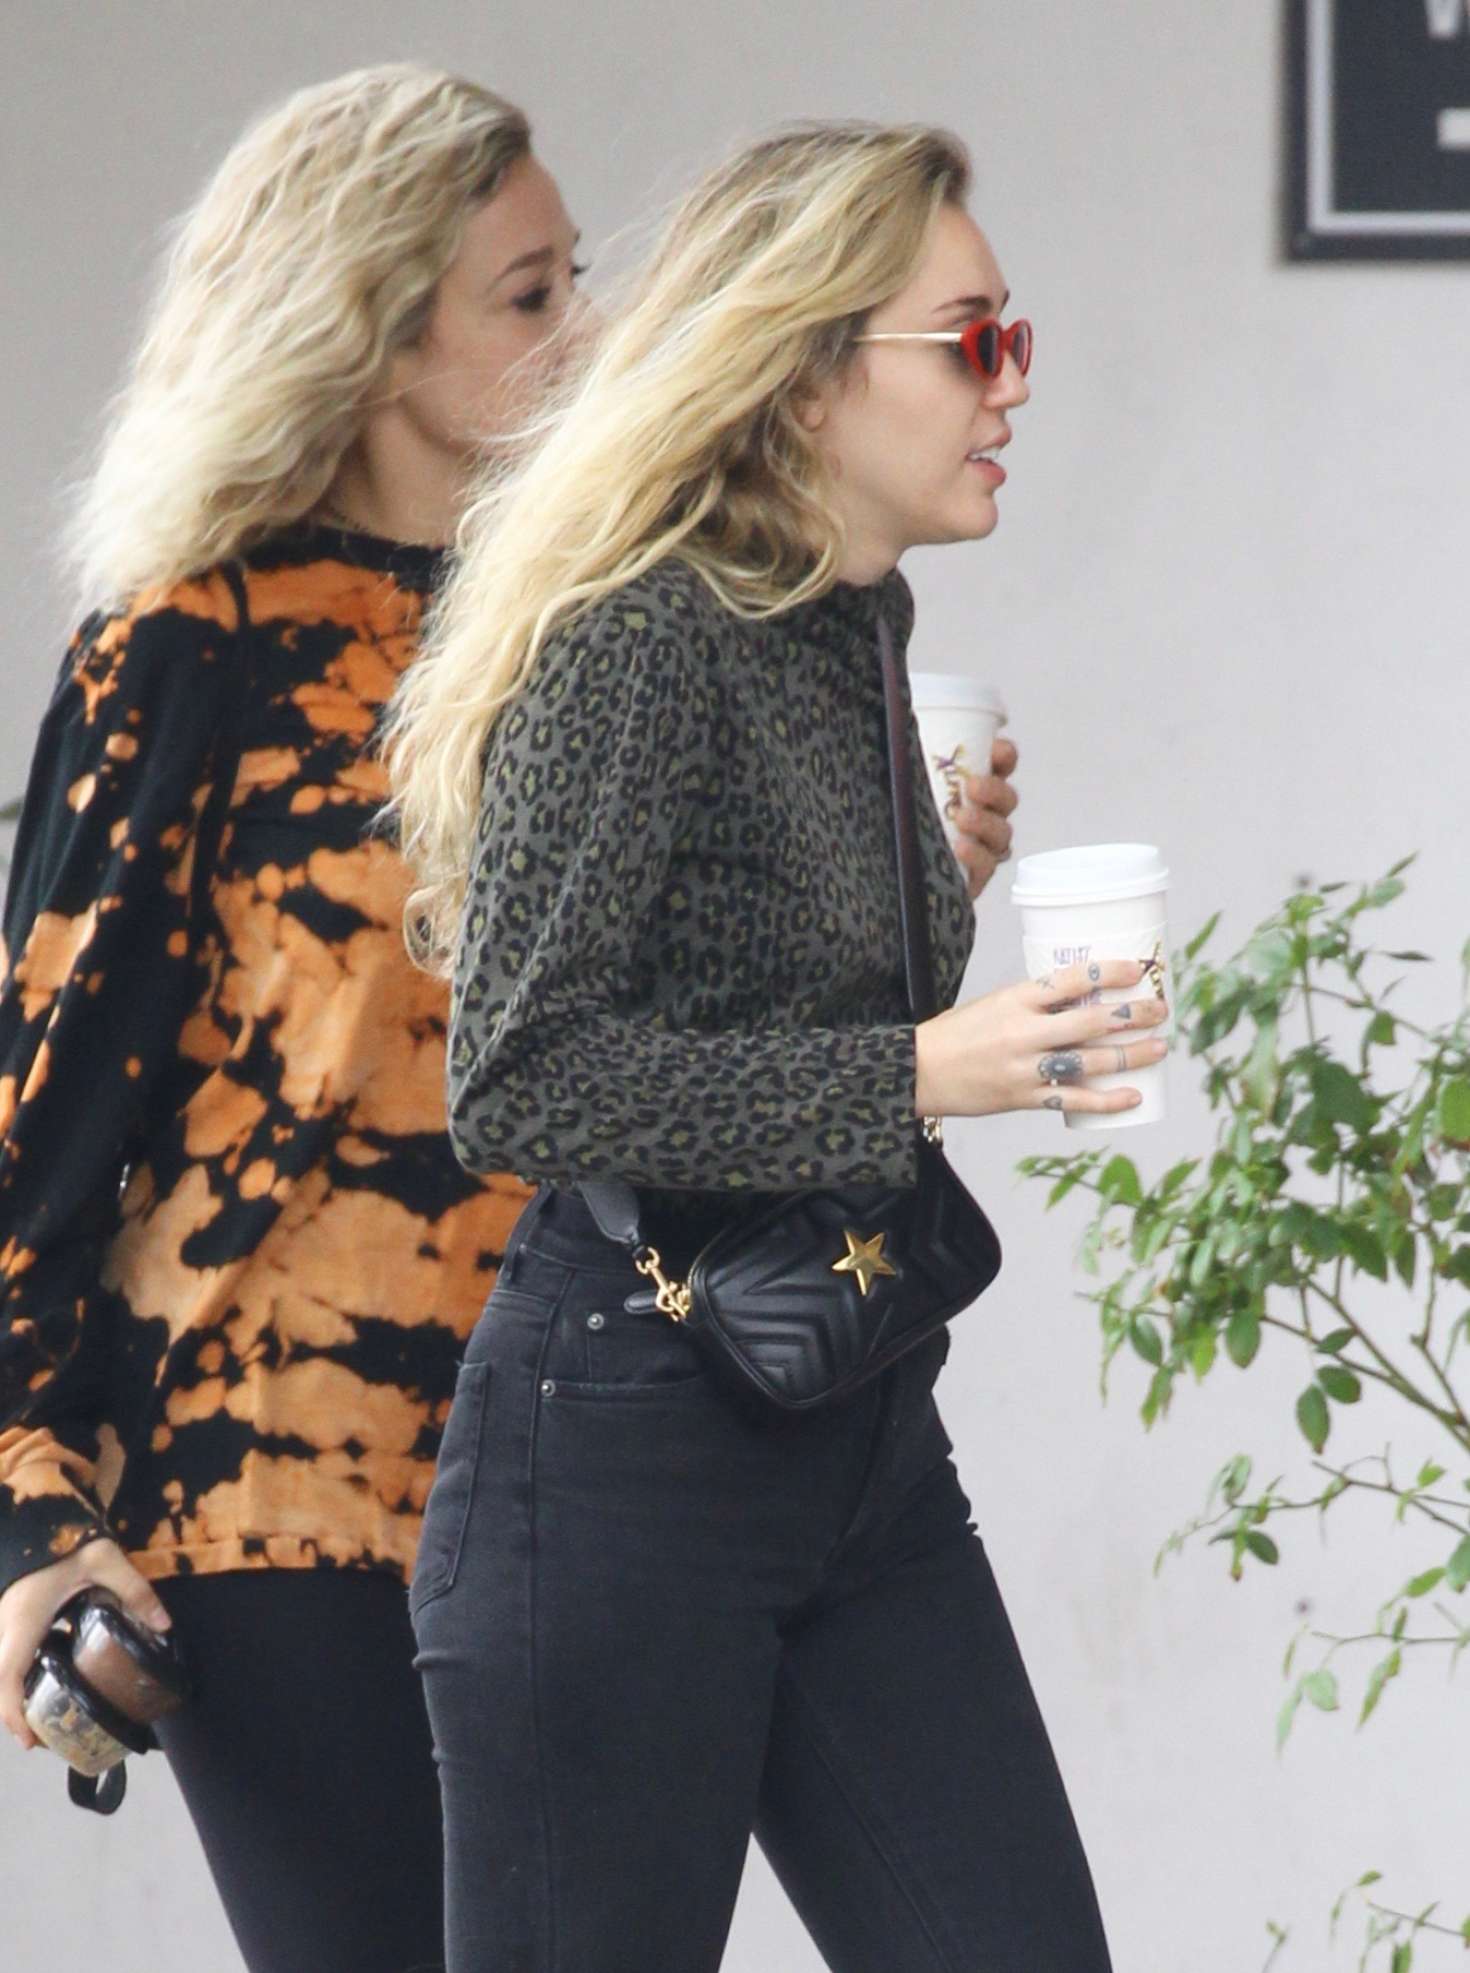 Miley Cyrus â€“ Shopping at Hankie Babies in Studio City